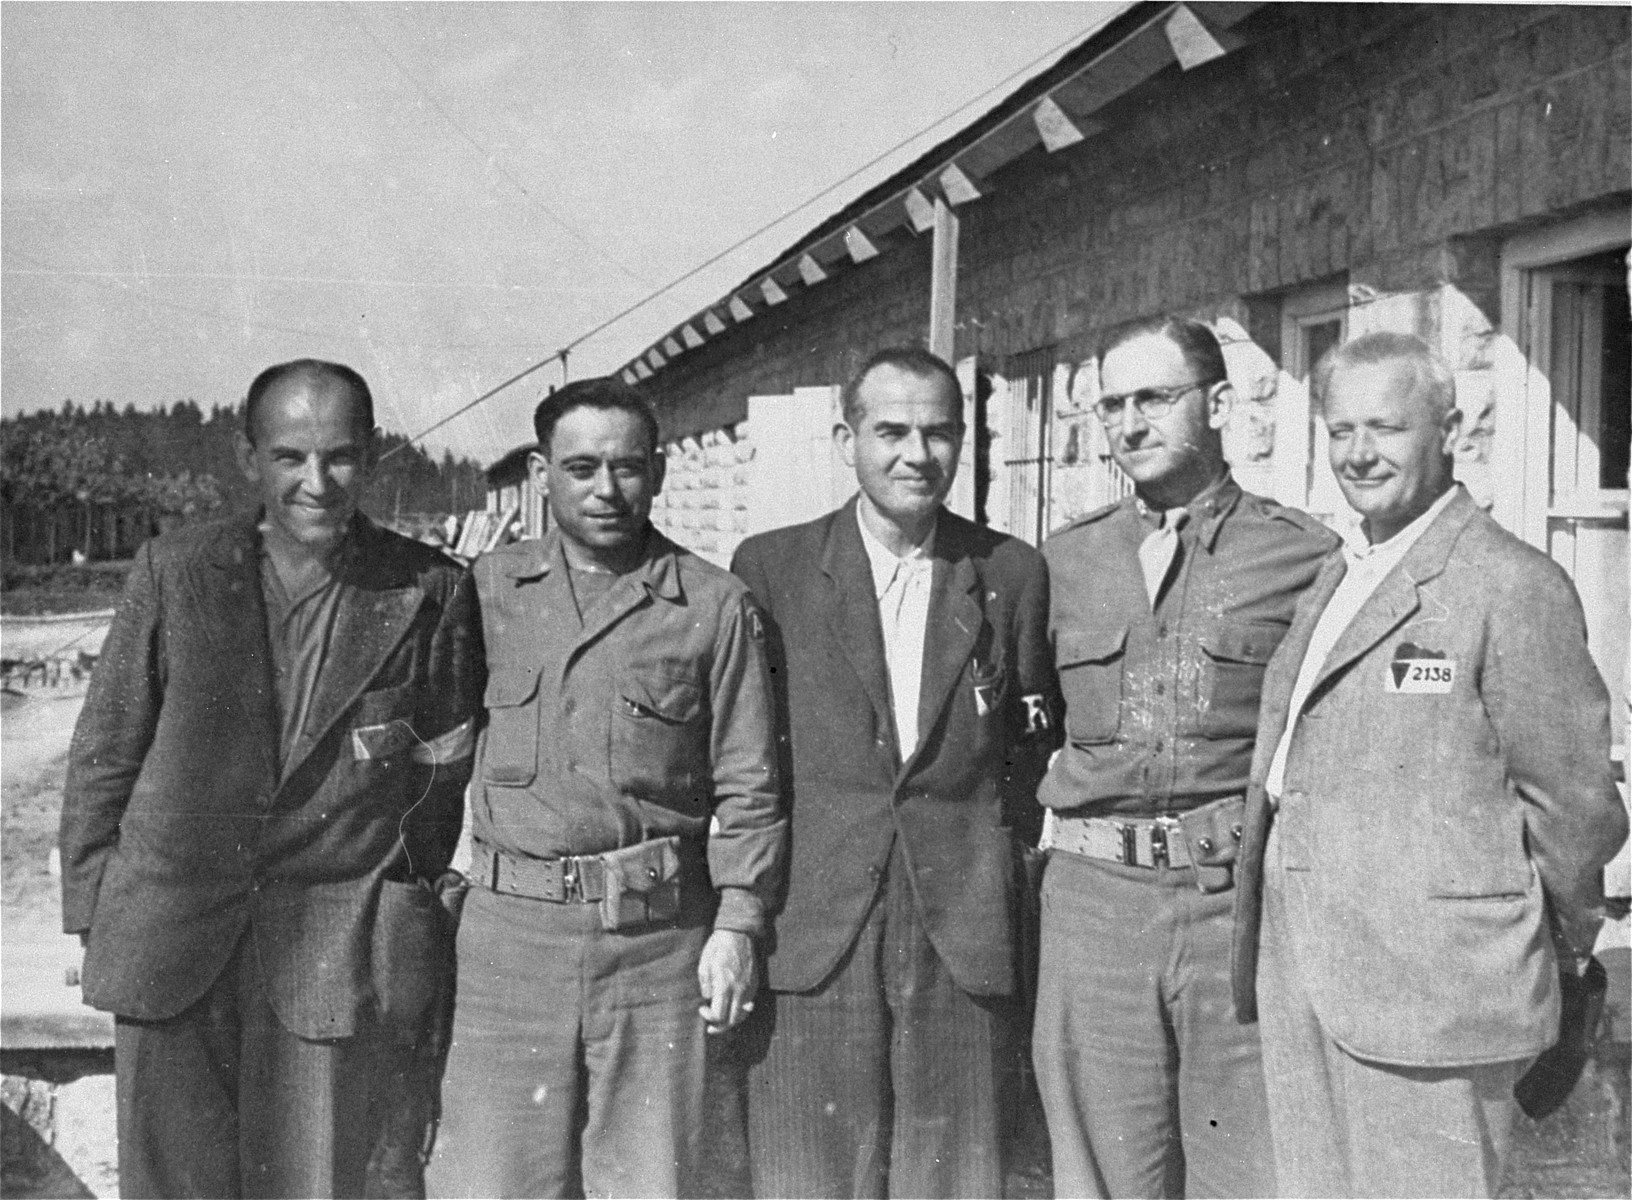 Mauthausen survivors pose with two American soldiers.

Pictured from left to right are: George Havelka from Prague; Jack Nowitz; Martin Ernor from Insbruck; Major Eugene Cohen (donor), and Joseph Ulbrecht, a former bank director from Prague.